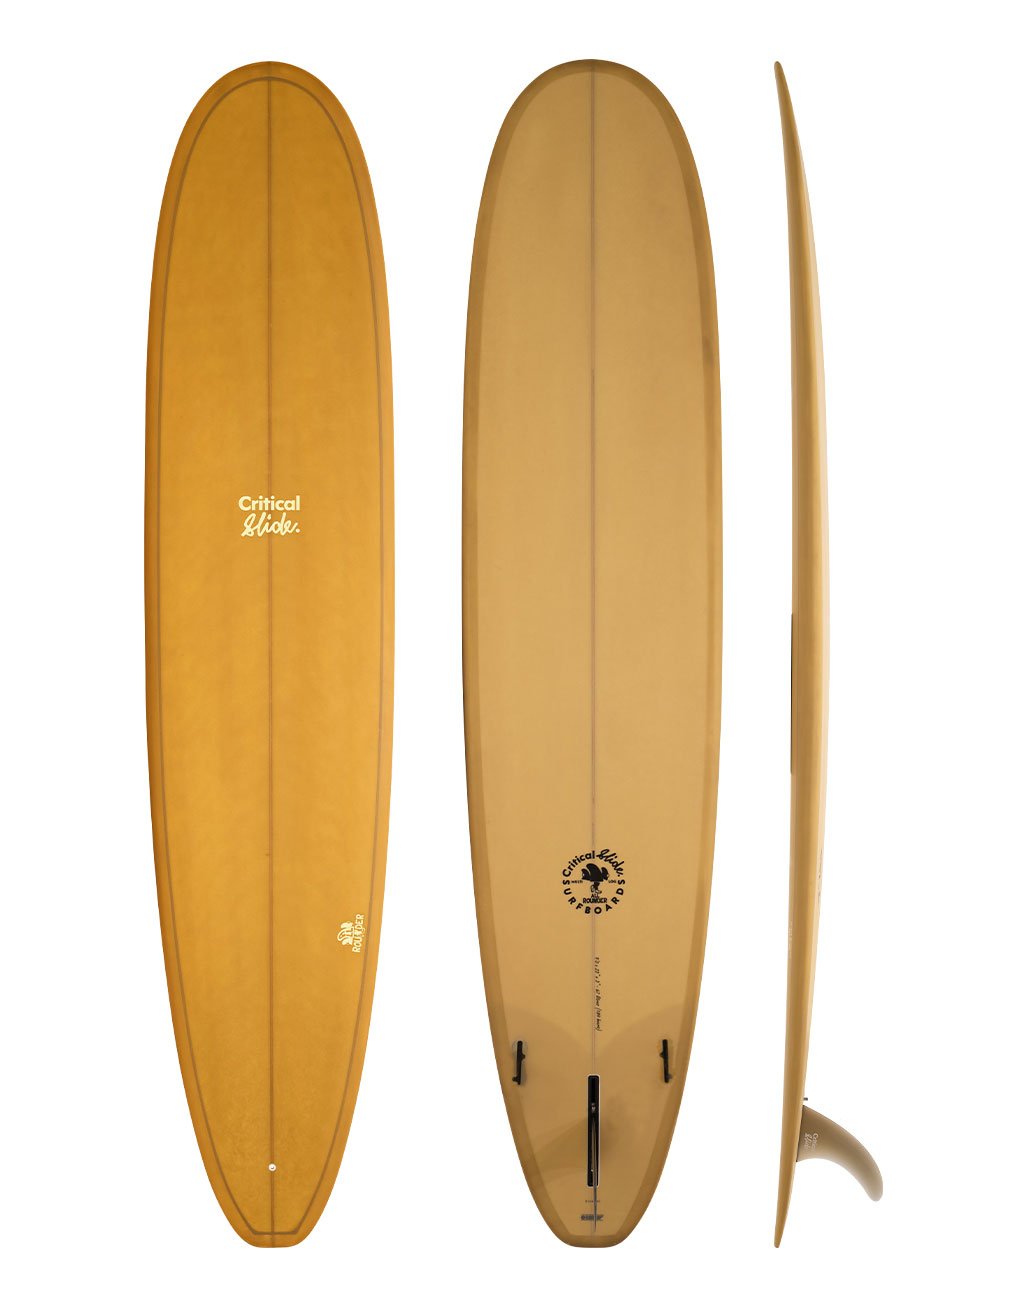 The Critical Slide Society Surfboards - All Rounder straw colored longboard